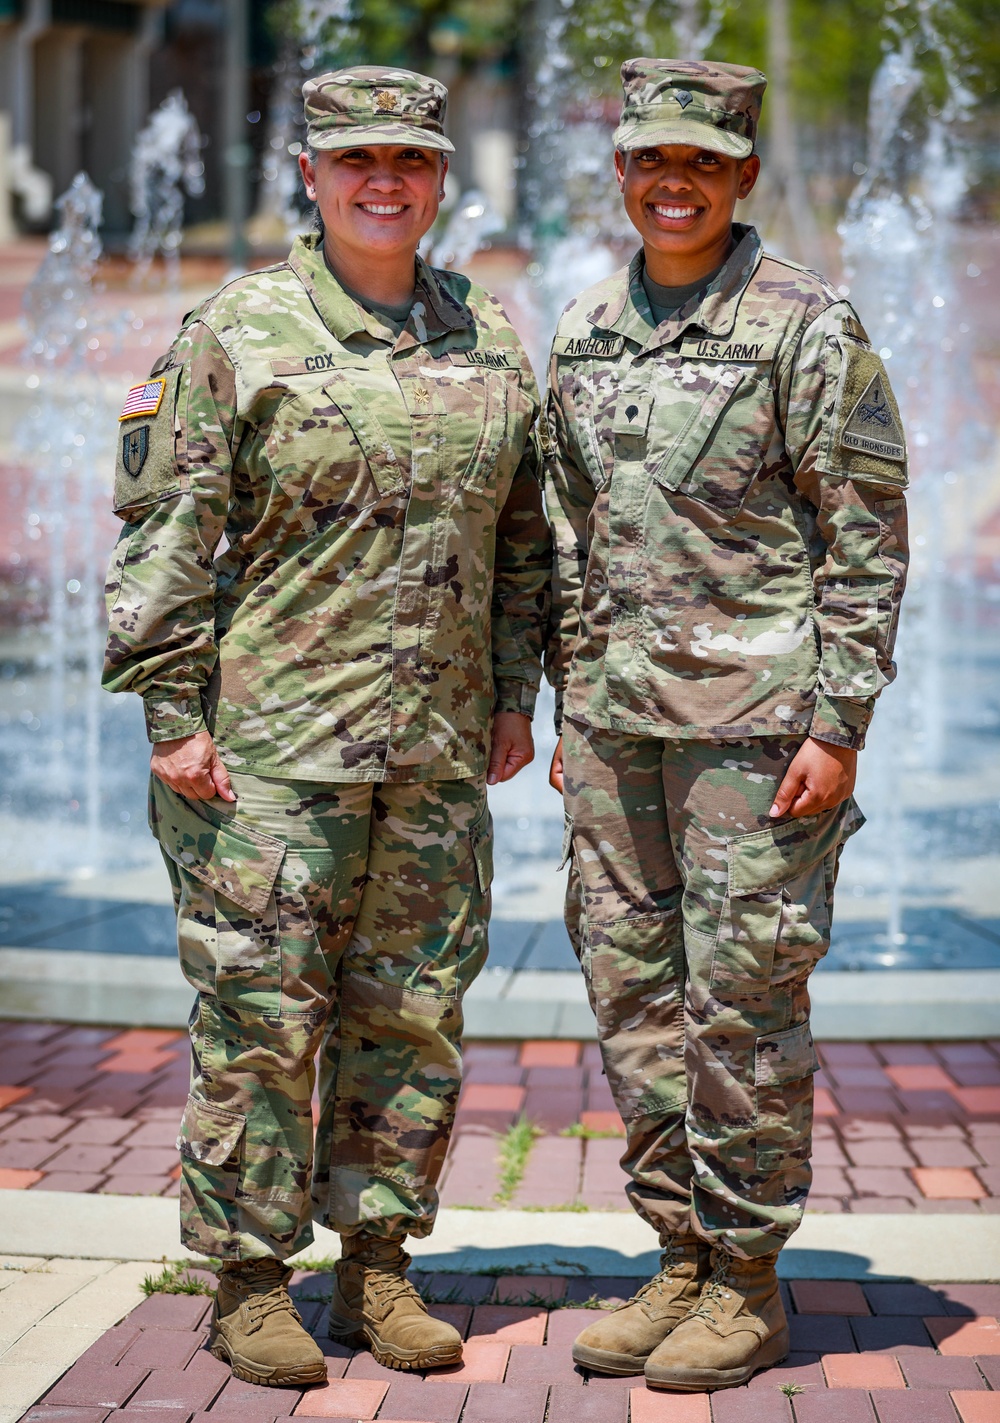 WOMEN’S EQUALITY DAY RESONATES WITH MOTHER, DAUGHTER ARMY DUO